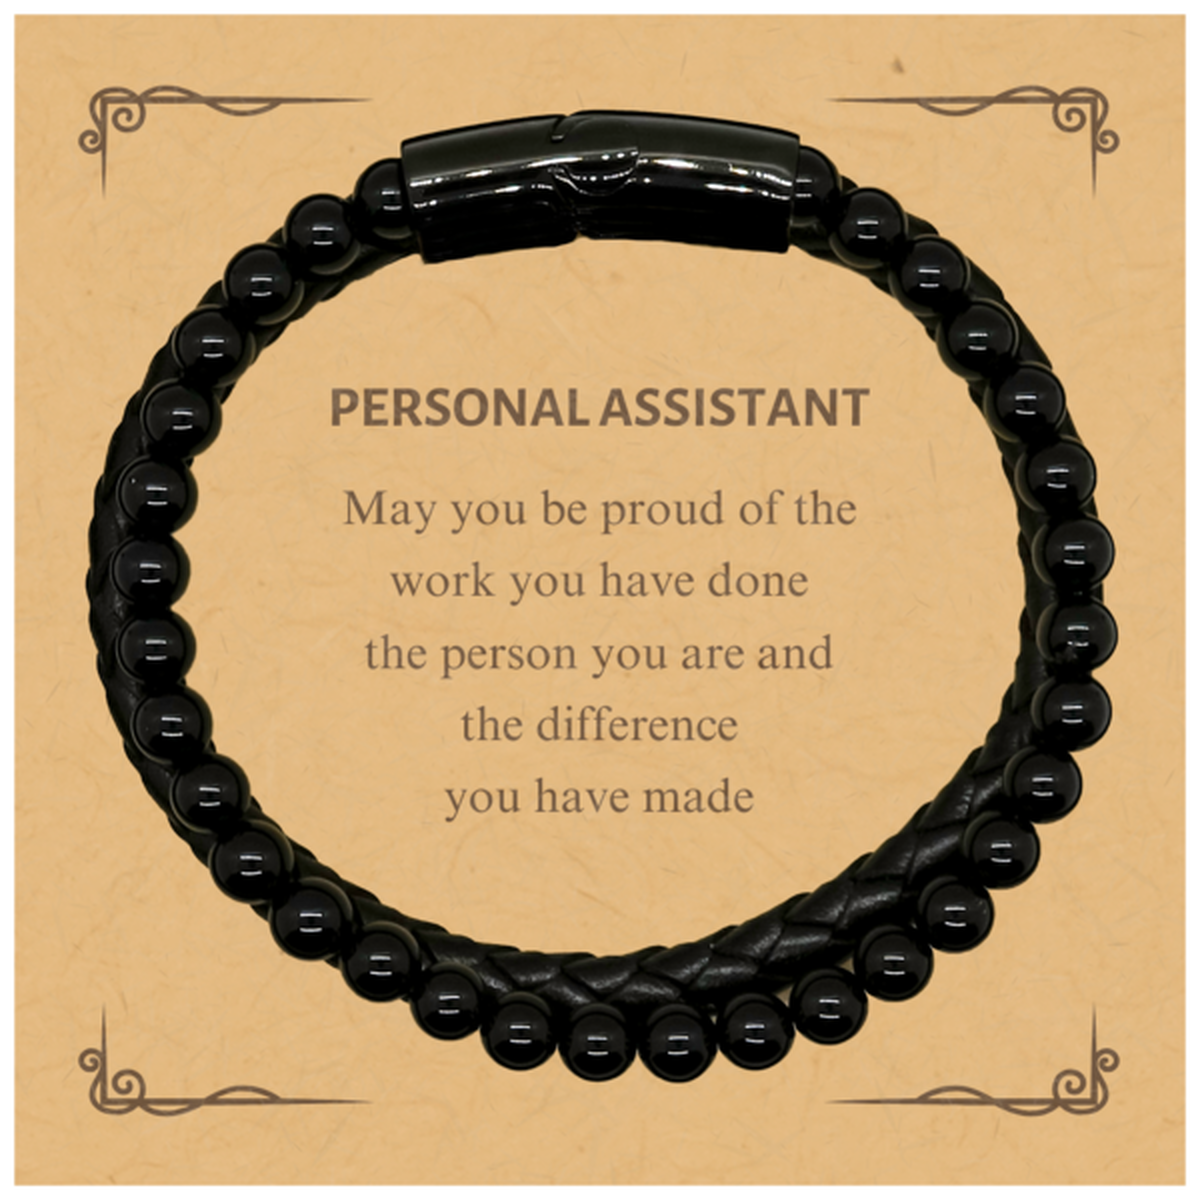 Personal Assistant May you be proud of the work you have done, Retirement Personal Assistant Stone Leather Bracelets for Colleague Appreciation Gifts Amazing for Personal Assistant